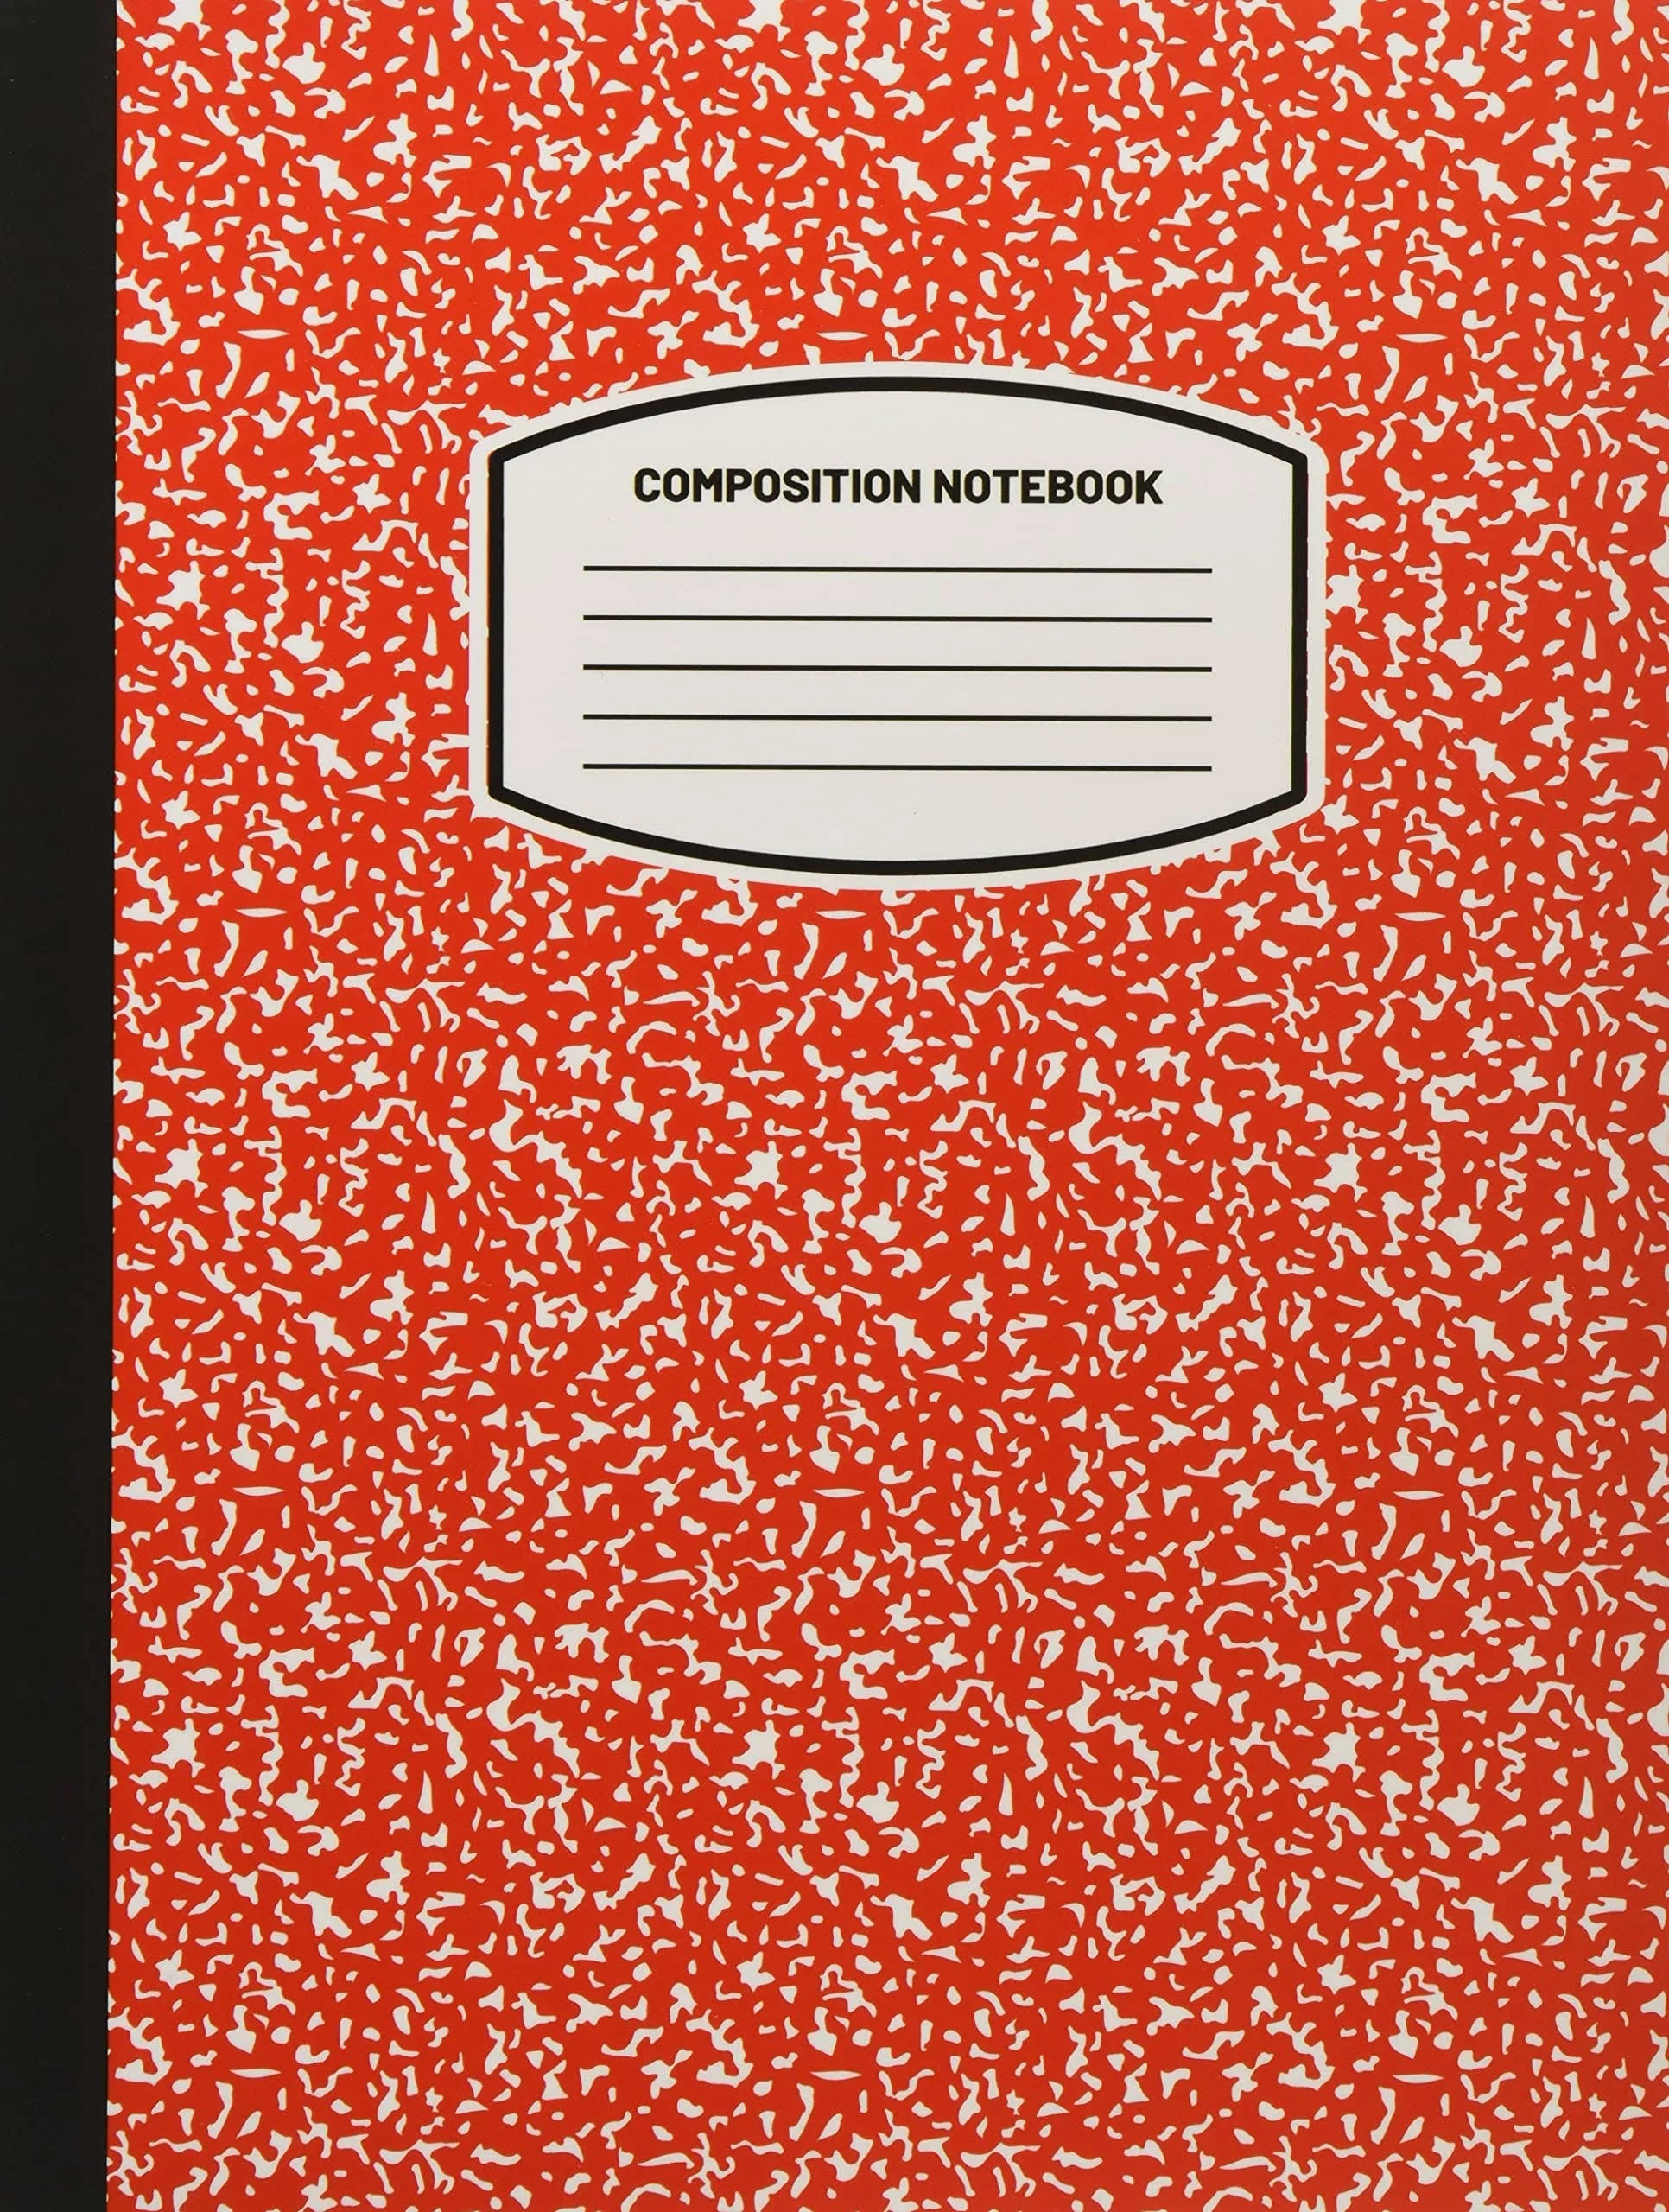 Classic Wide Ruled Lined Paper Notebook for School and Work | Image